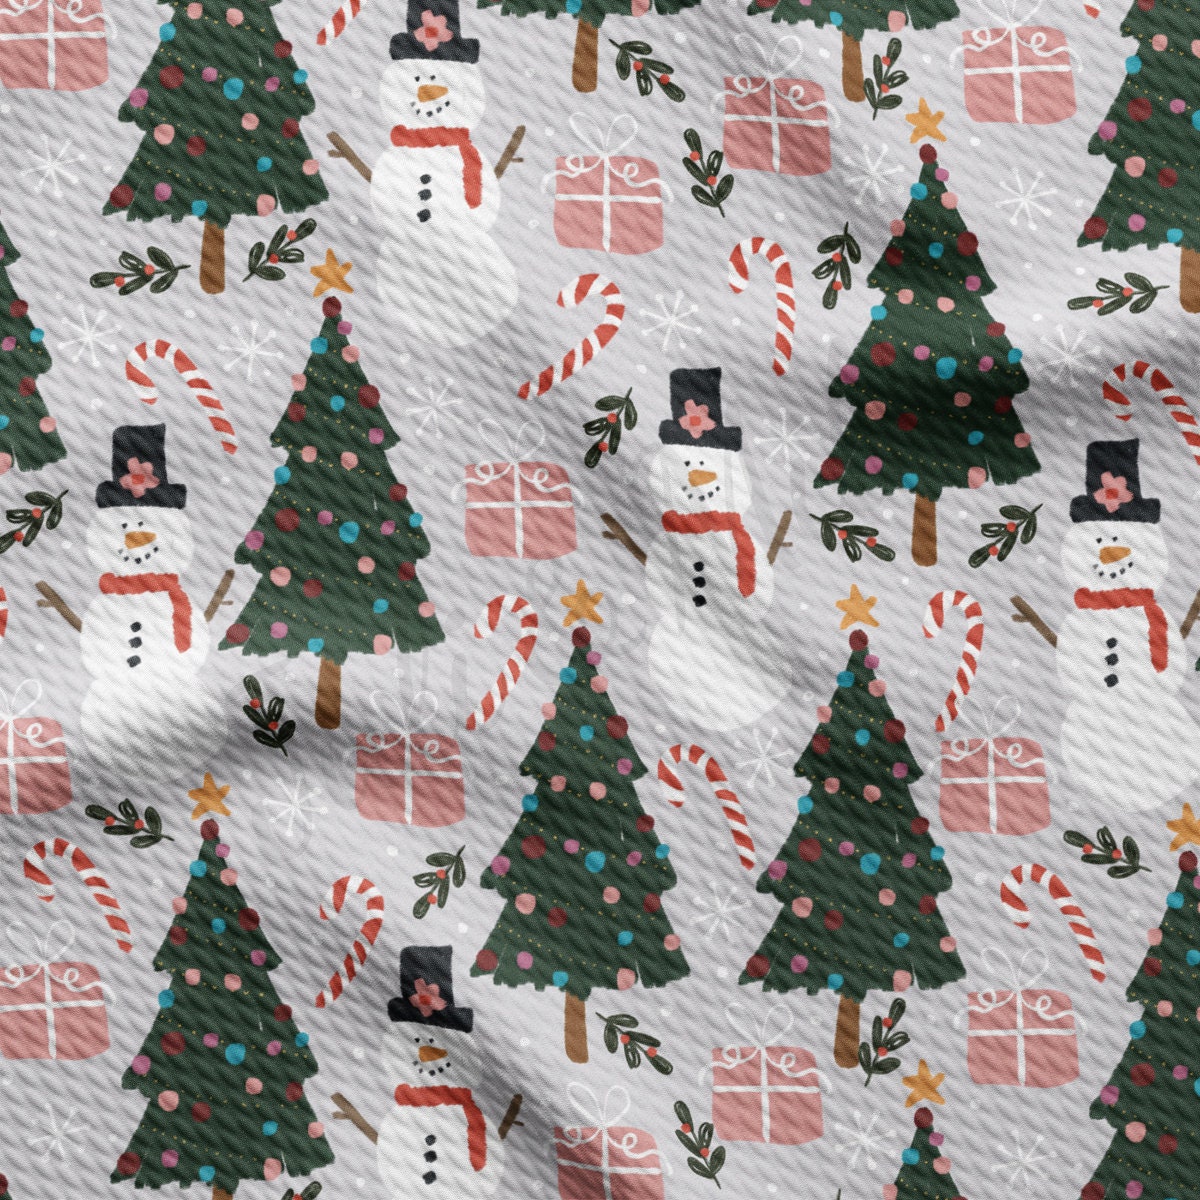 Christmas Printed Liverpool Bullet Textured Fabric by the yard 4Way Stretch Solid Strip Thick Knit Liverpool Fabric AA2149